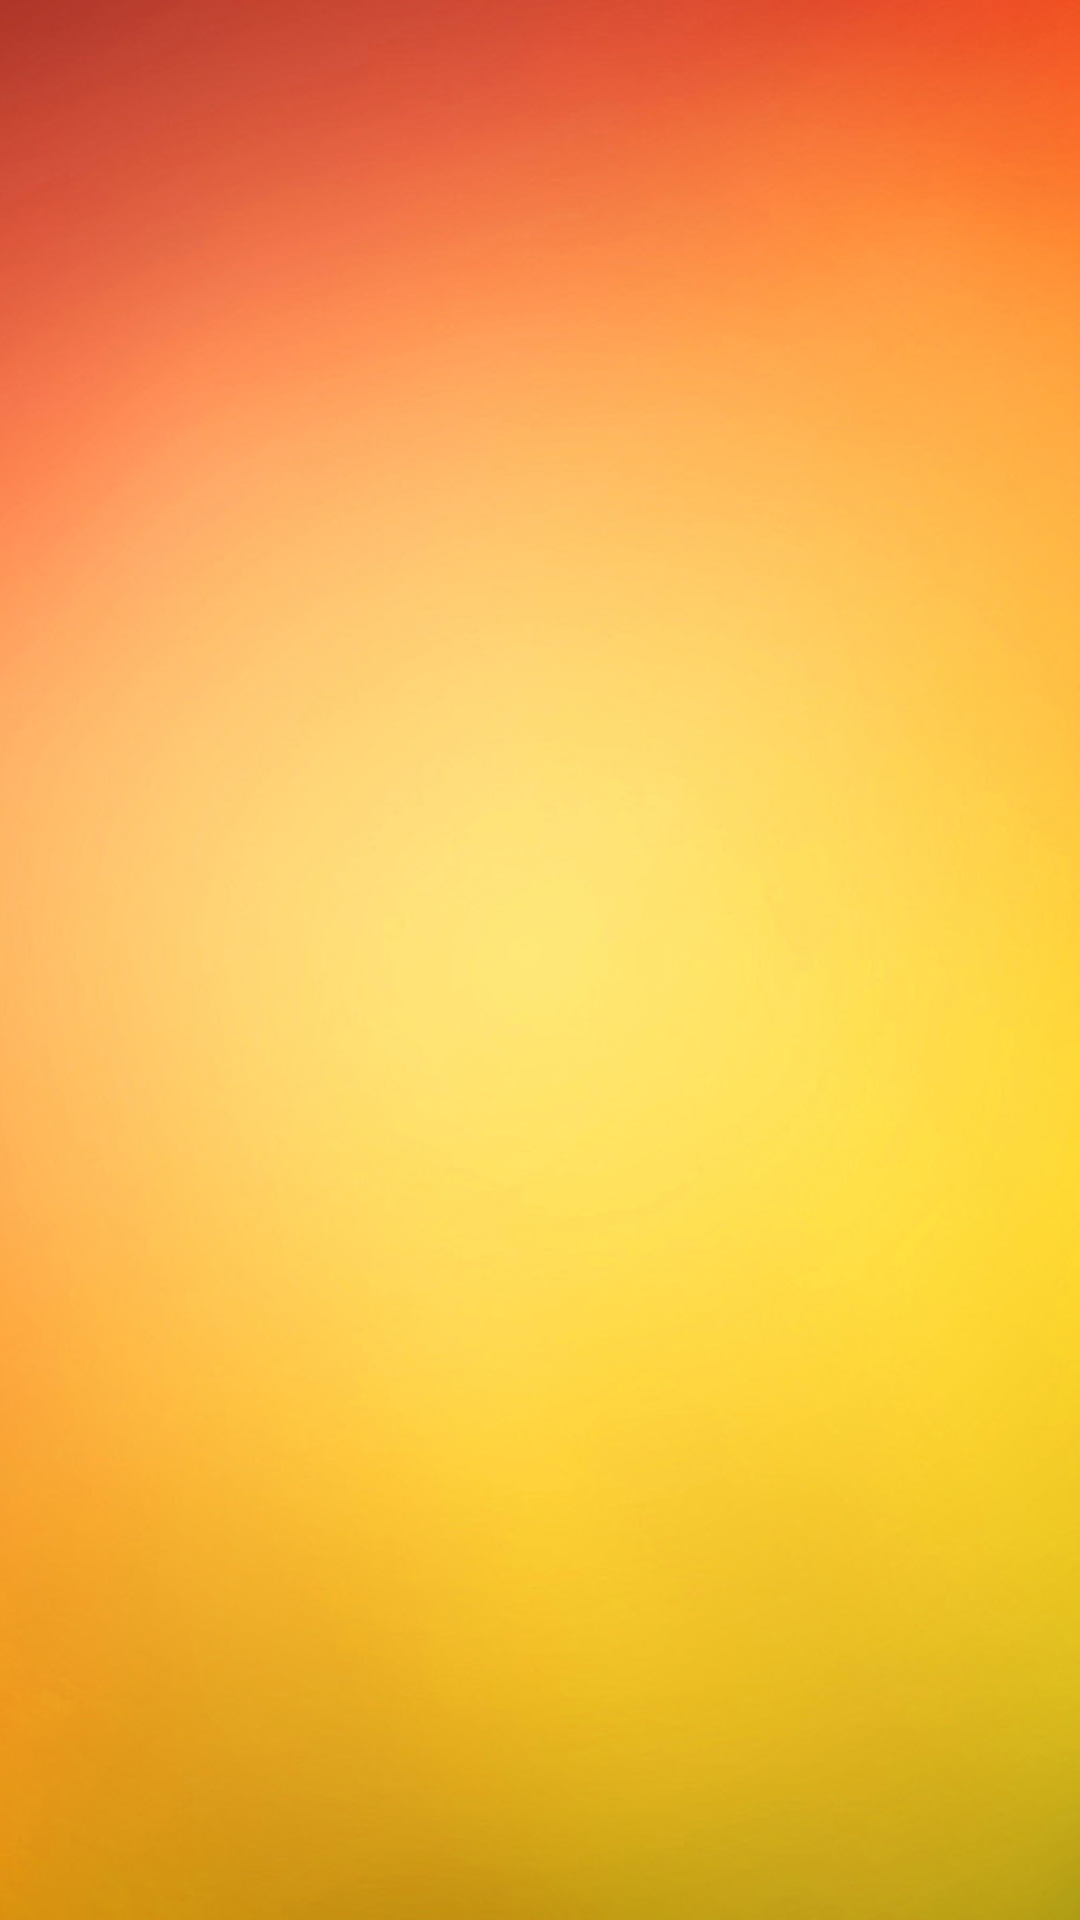 Light Colored Background wallpaper 1080x1920